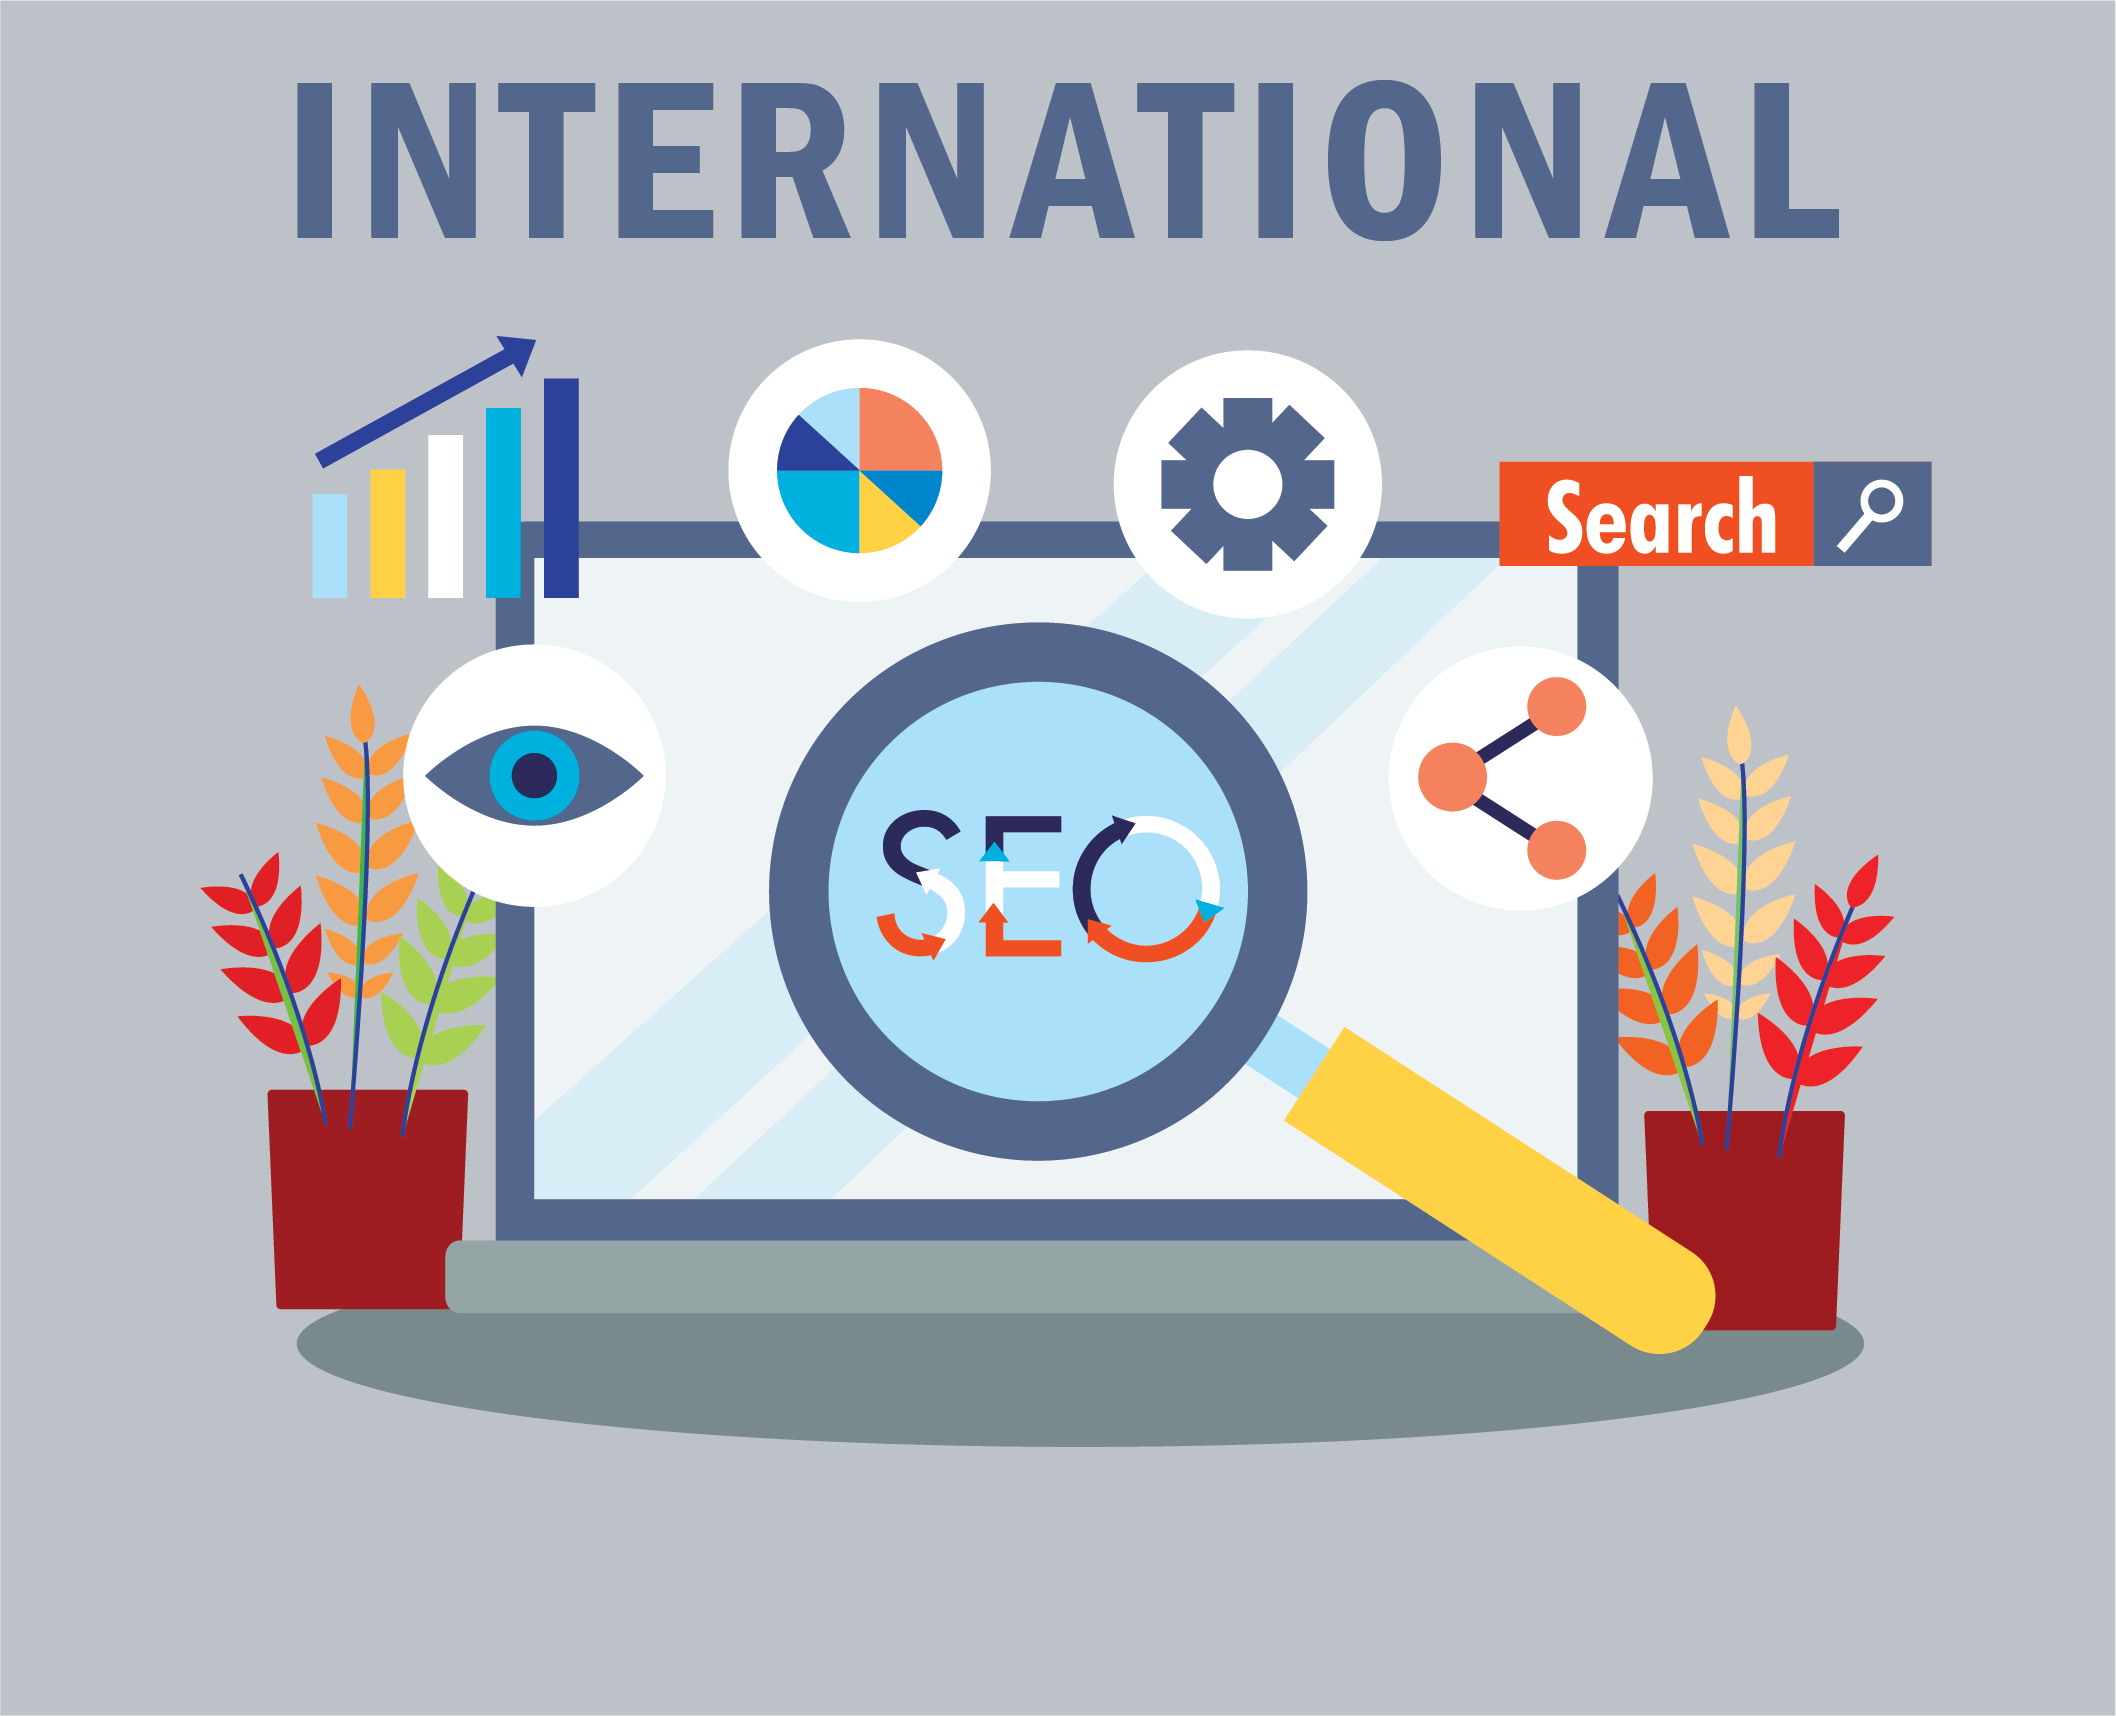 Everything you need to know about International SEO.